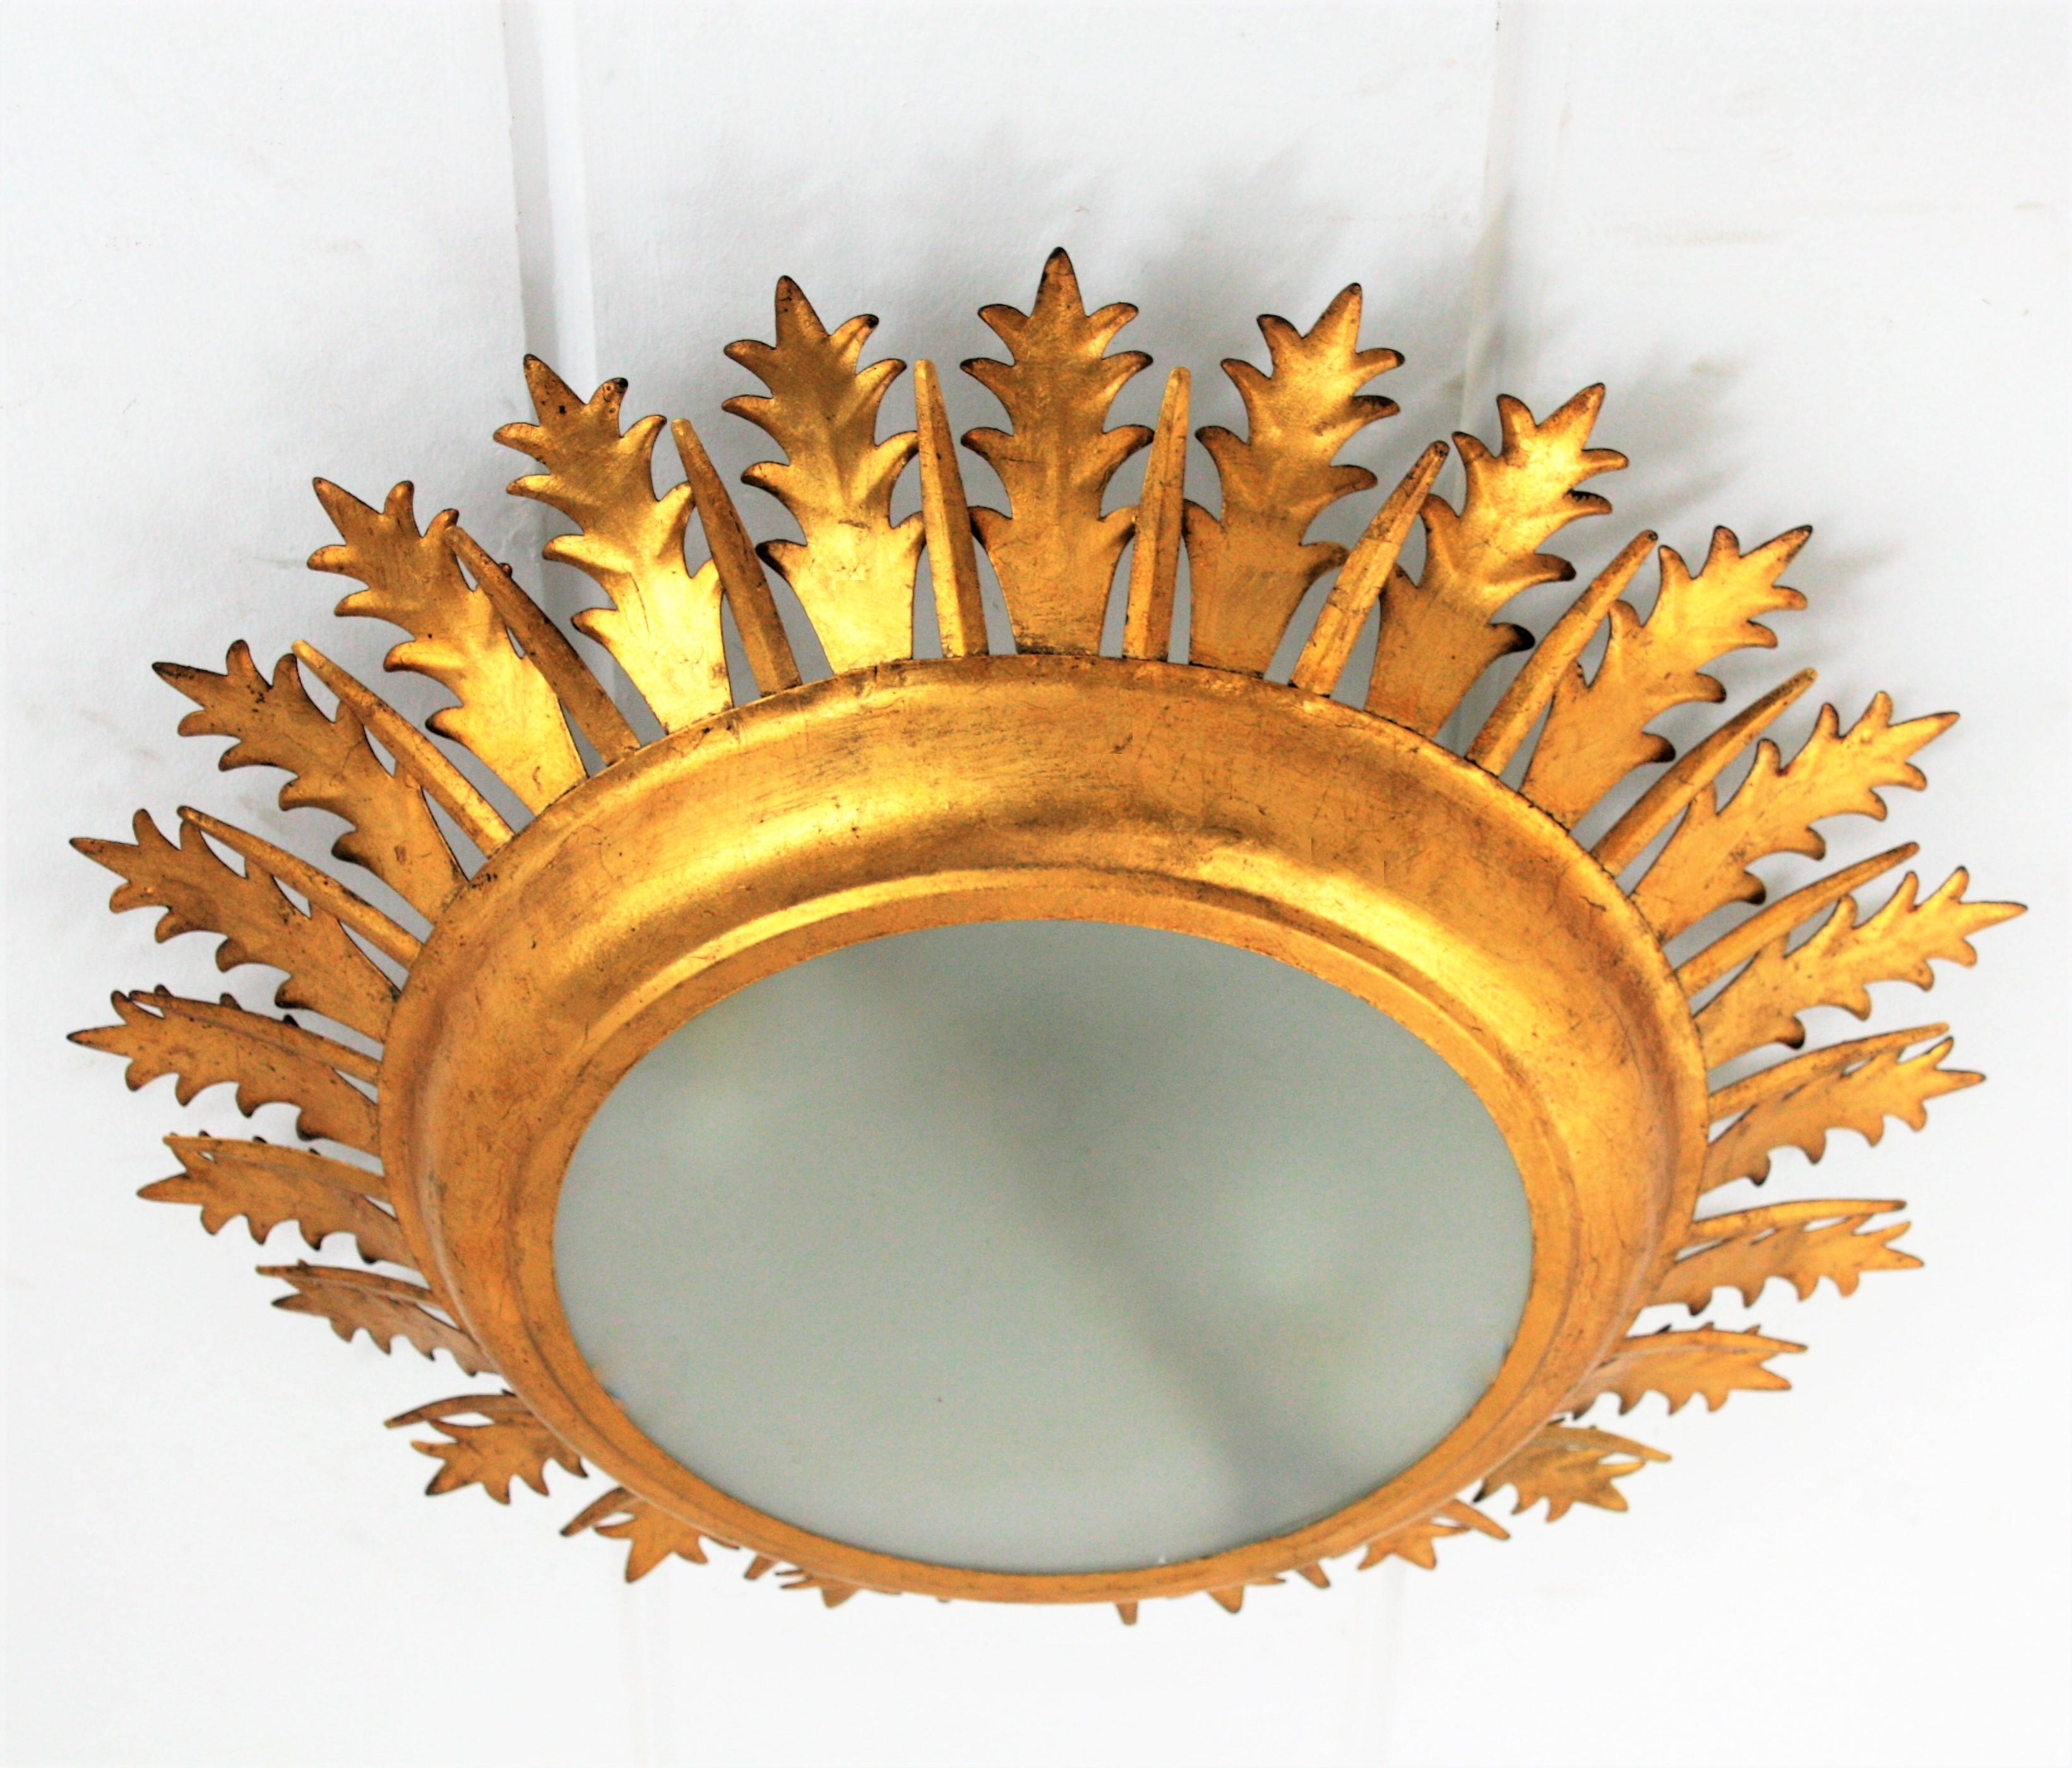 Extra large hand-hammered Mid-Century Modern gilt iron sunburst crown leafed light fixture with frosted glass difusser, Spain, 1950-1960.
This magnificent sunburst crown light fixture or flush mount has two layers of leaves in different sizes and